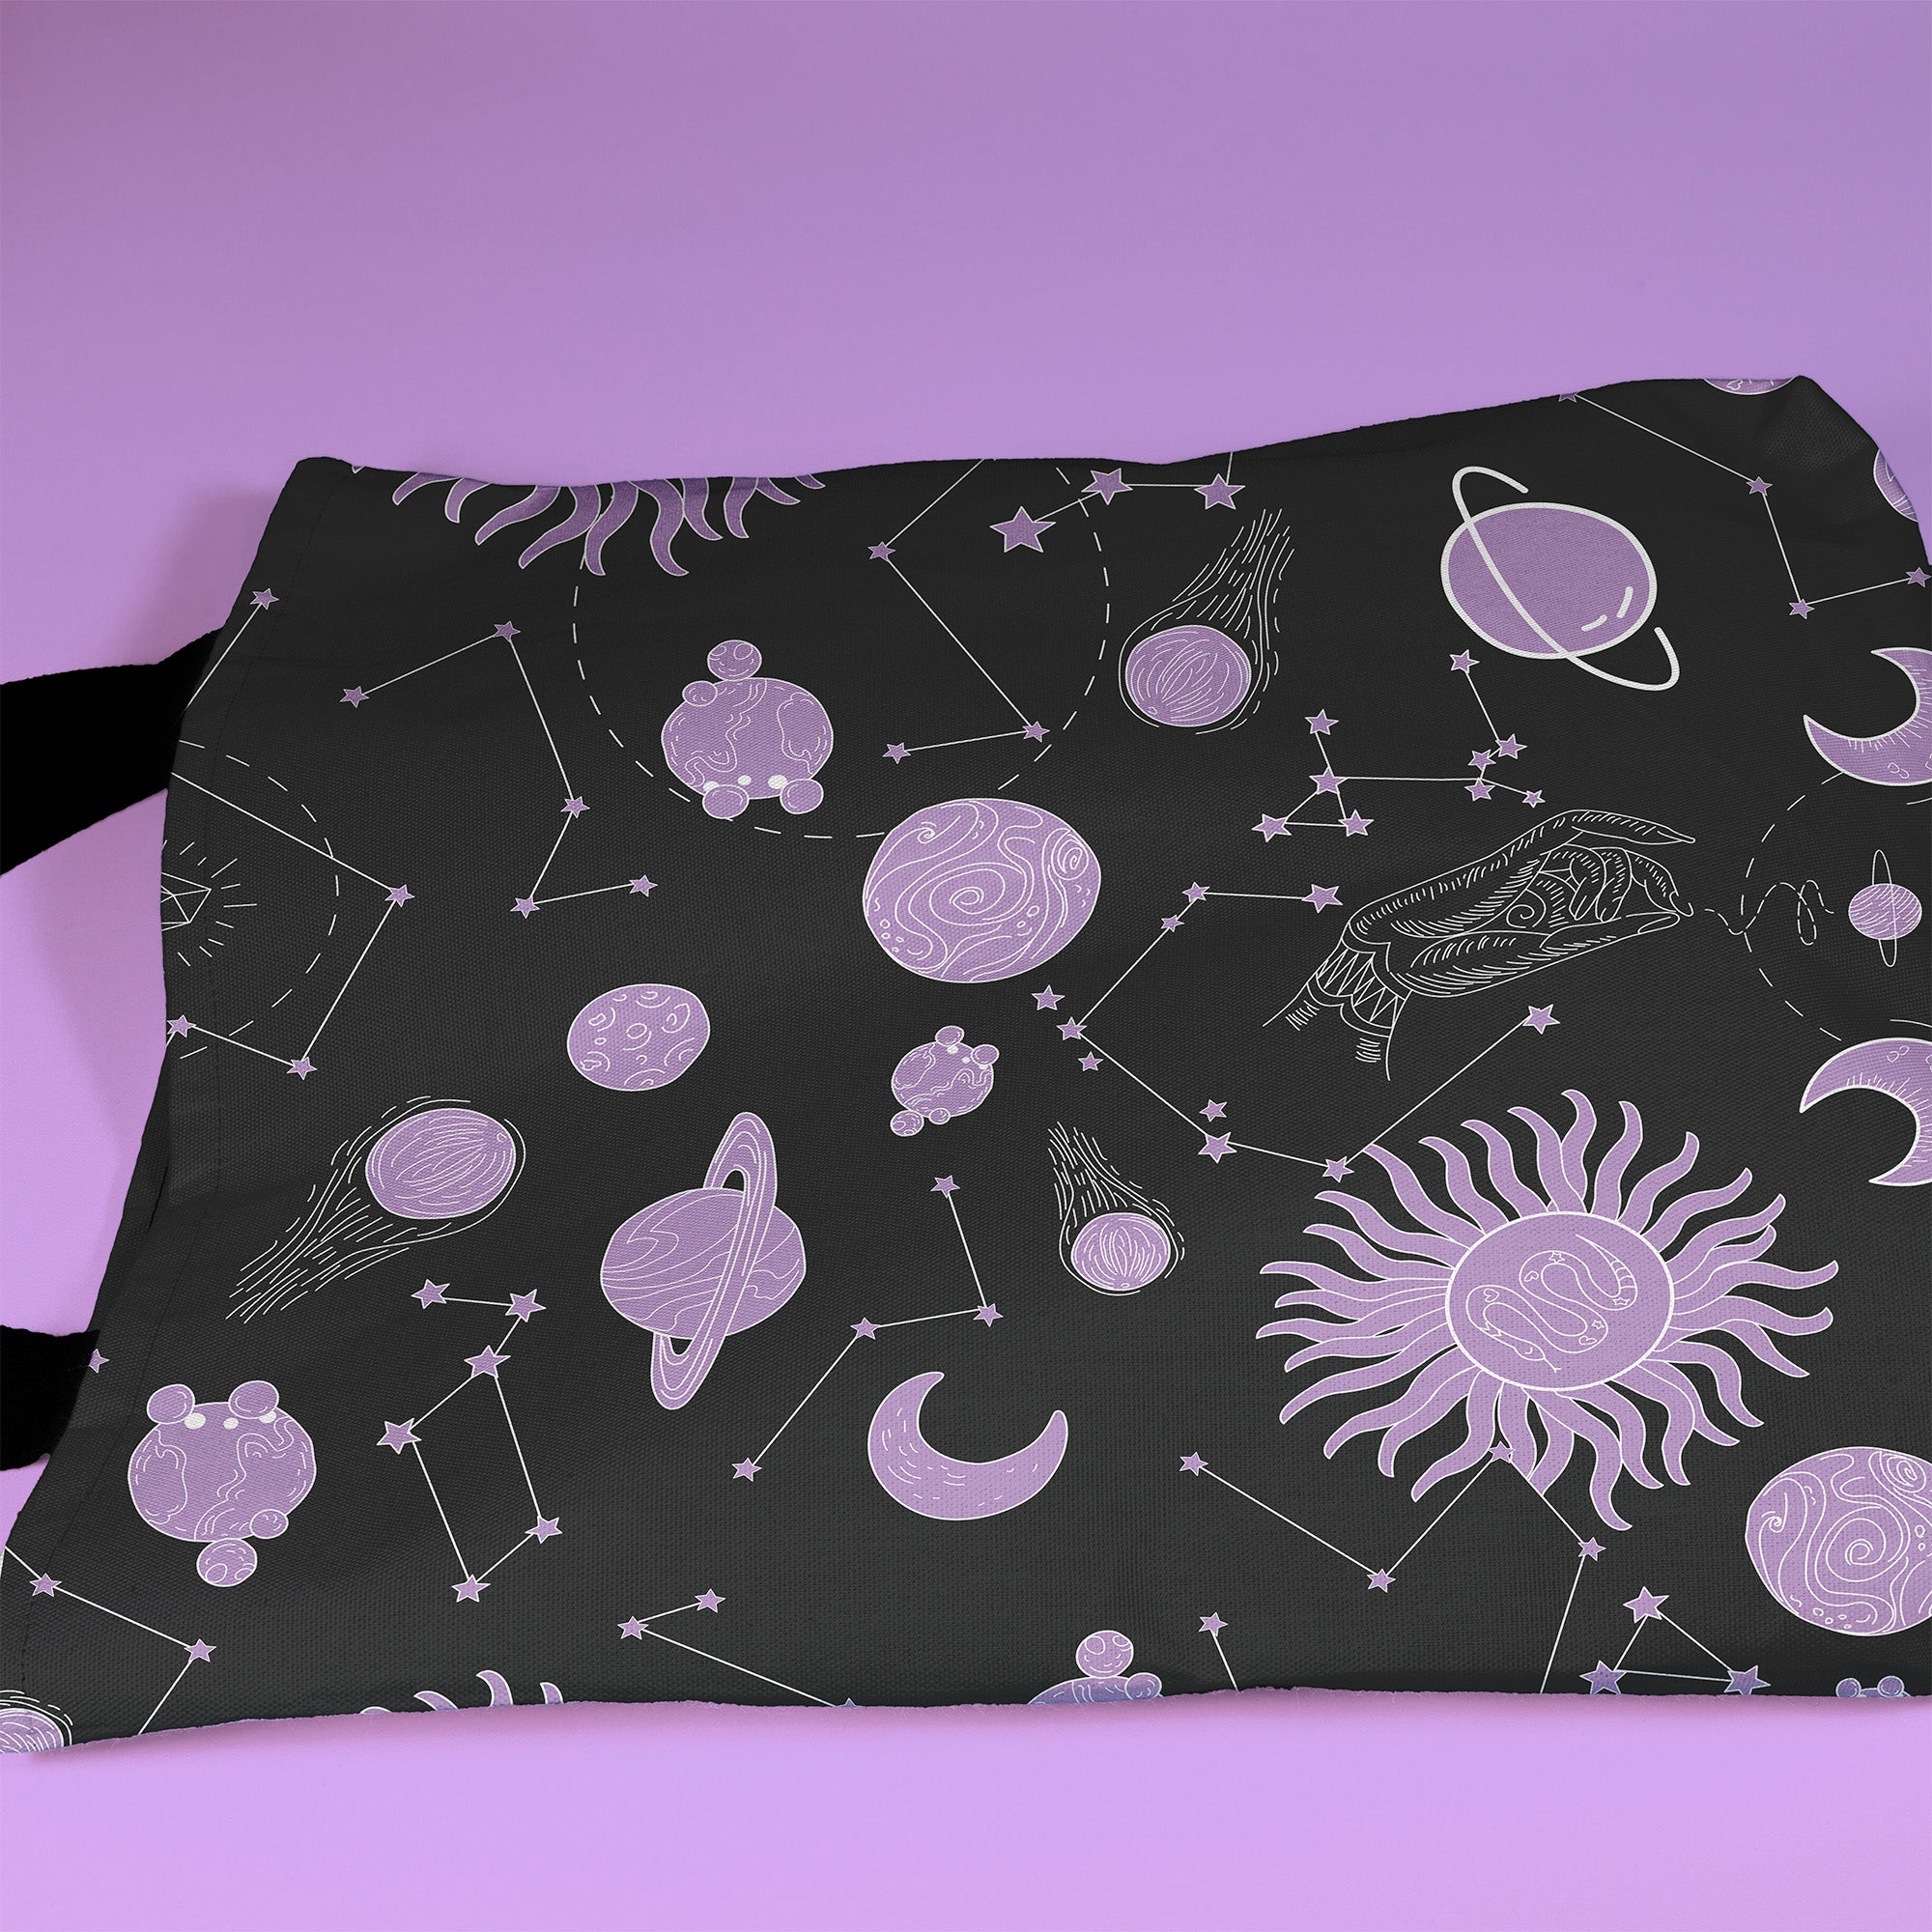 Celestial Cartography Carryall Tote in Midnight Purple